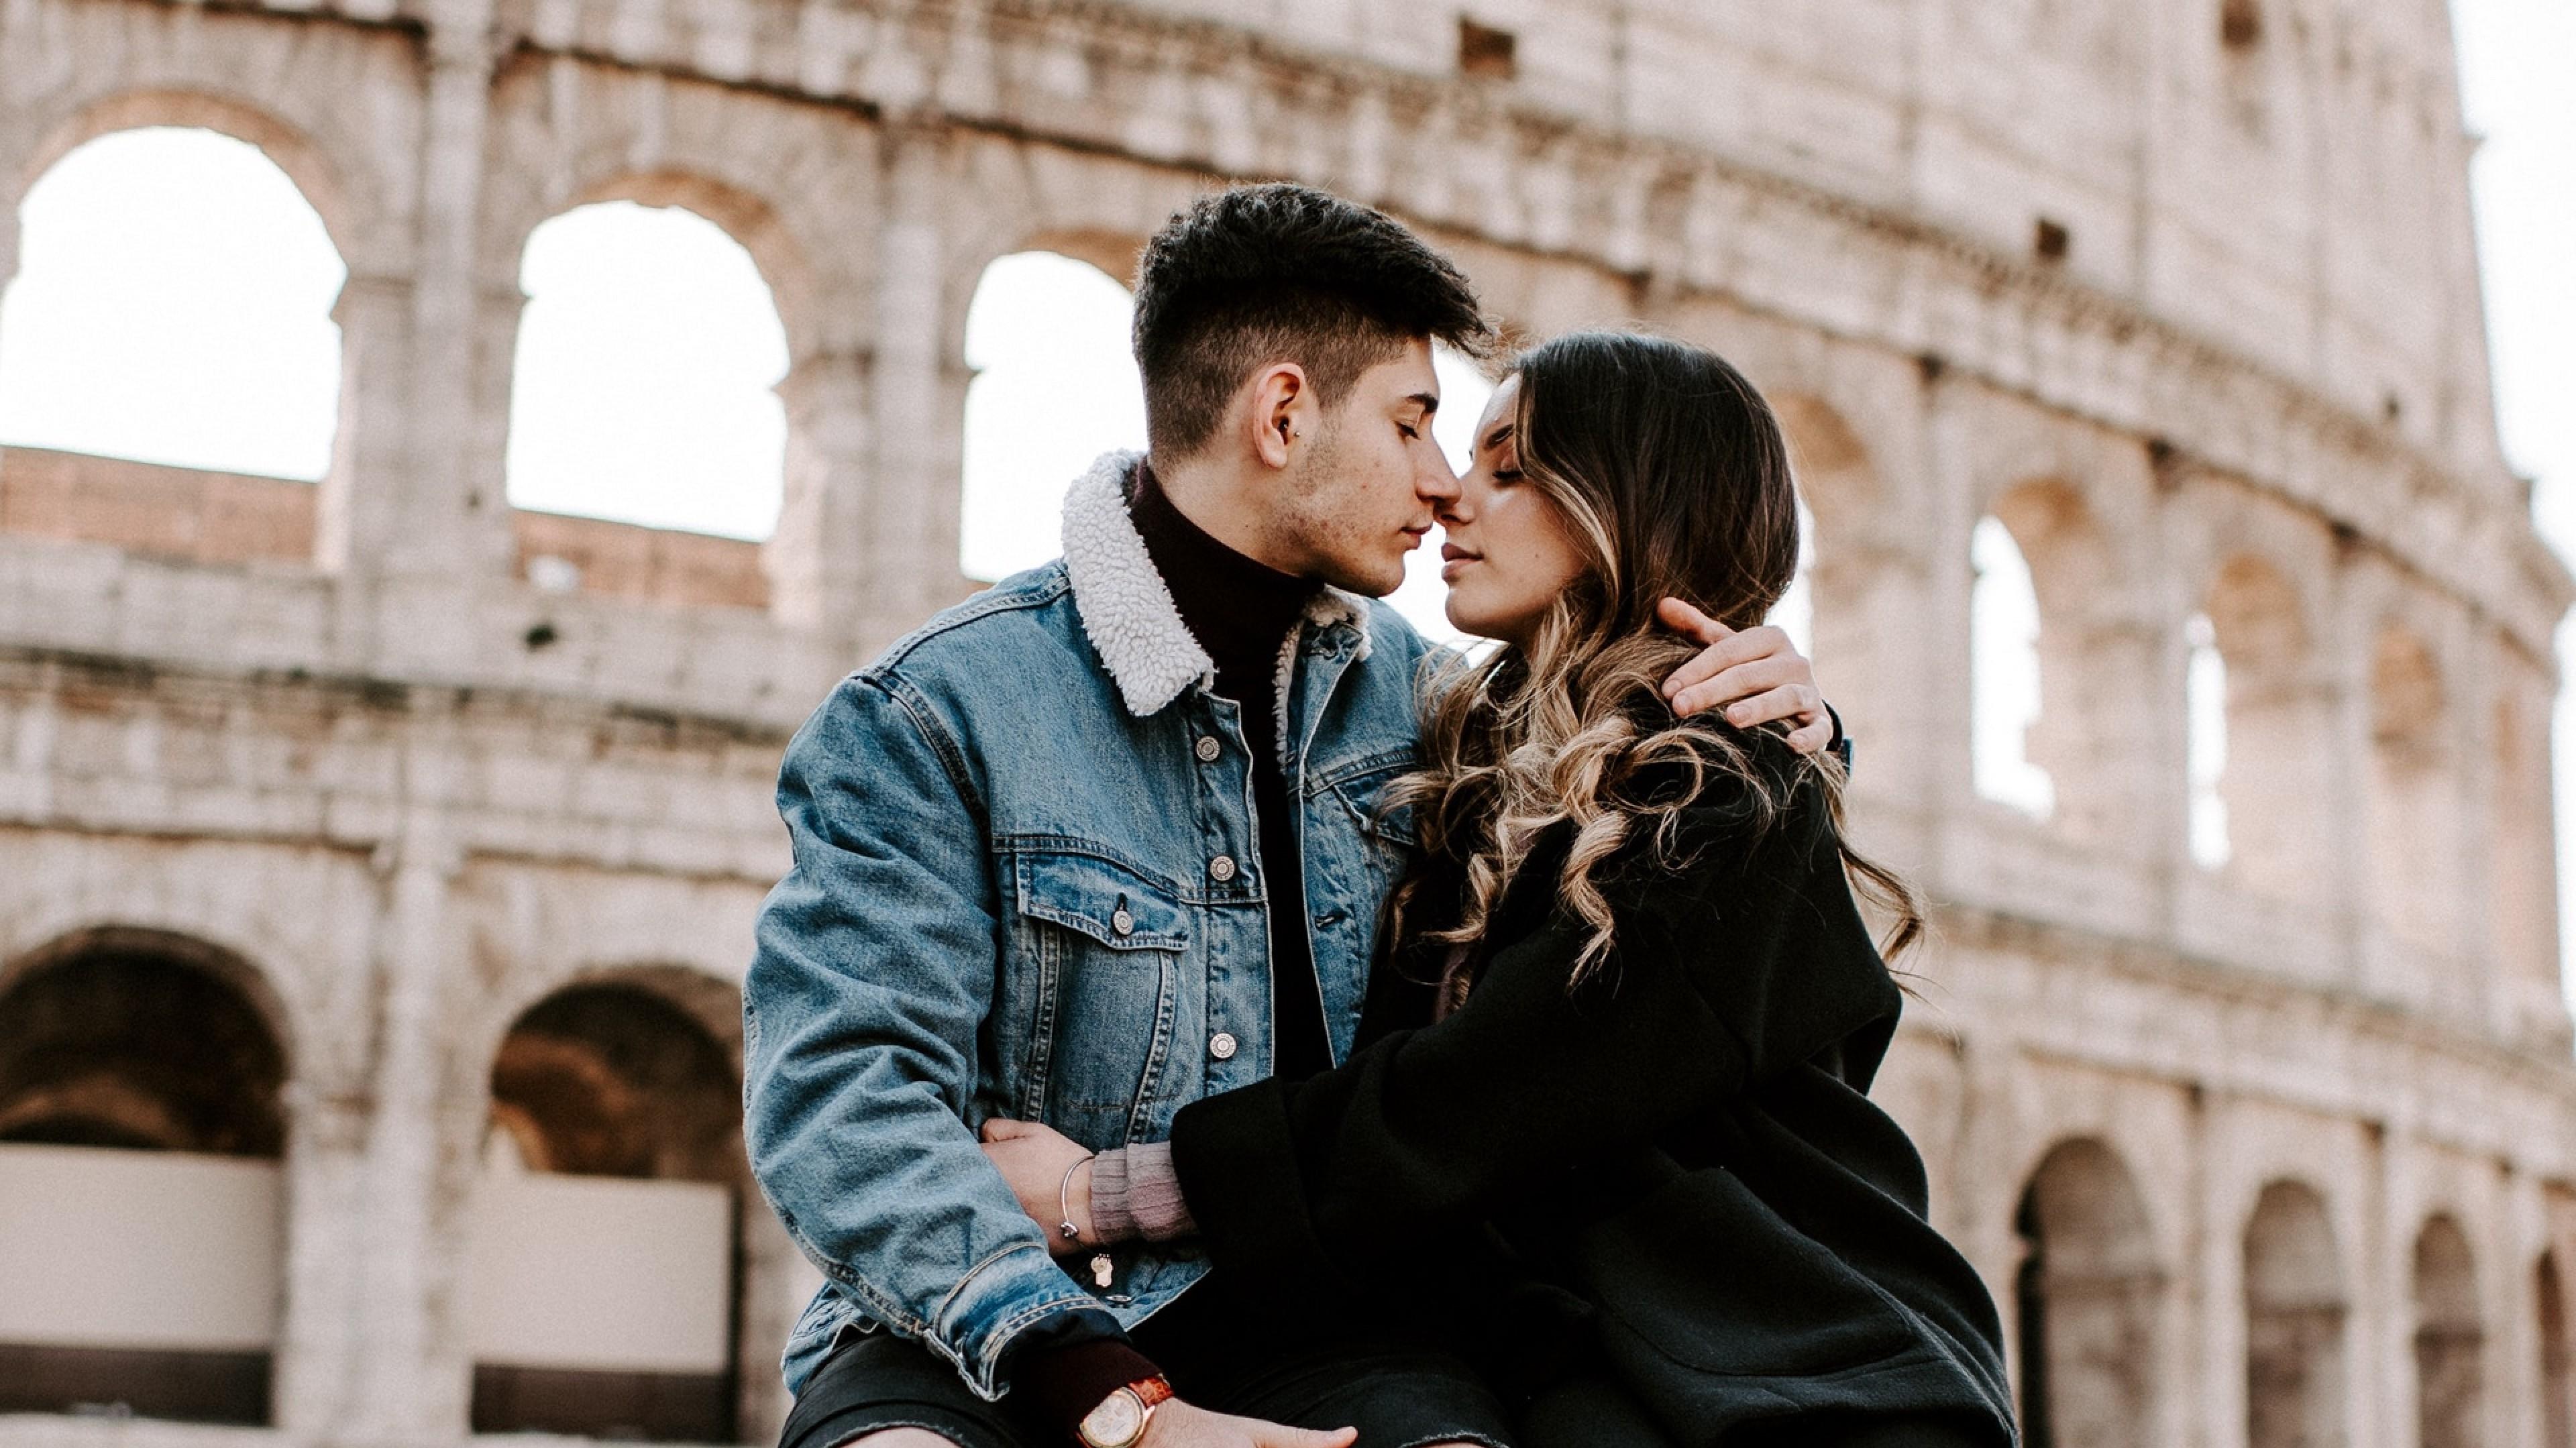 Couple Kissing At The Coloseum HD Wallpaper 4k Ultra